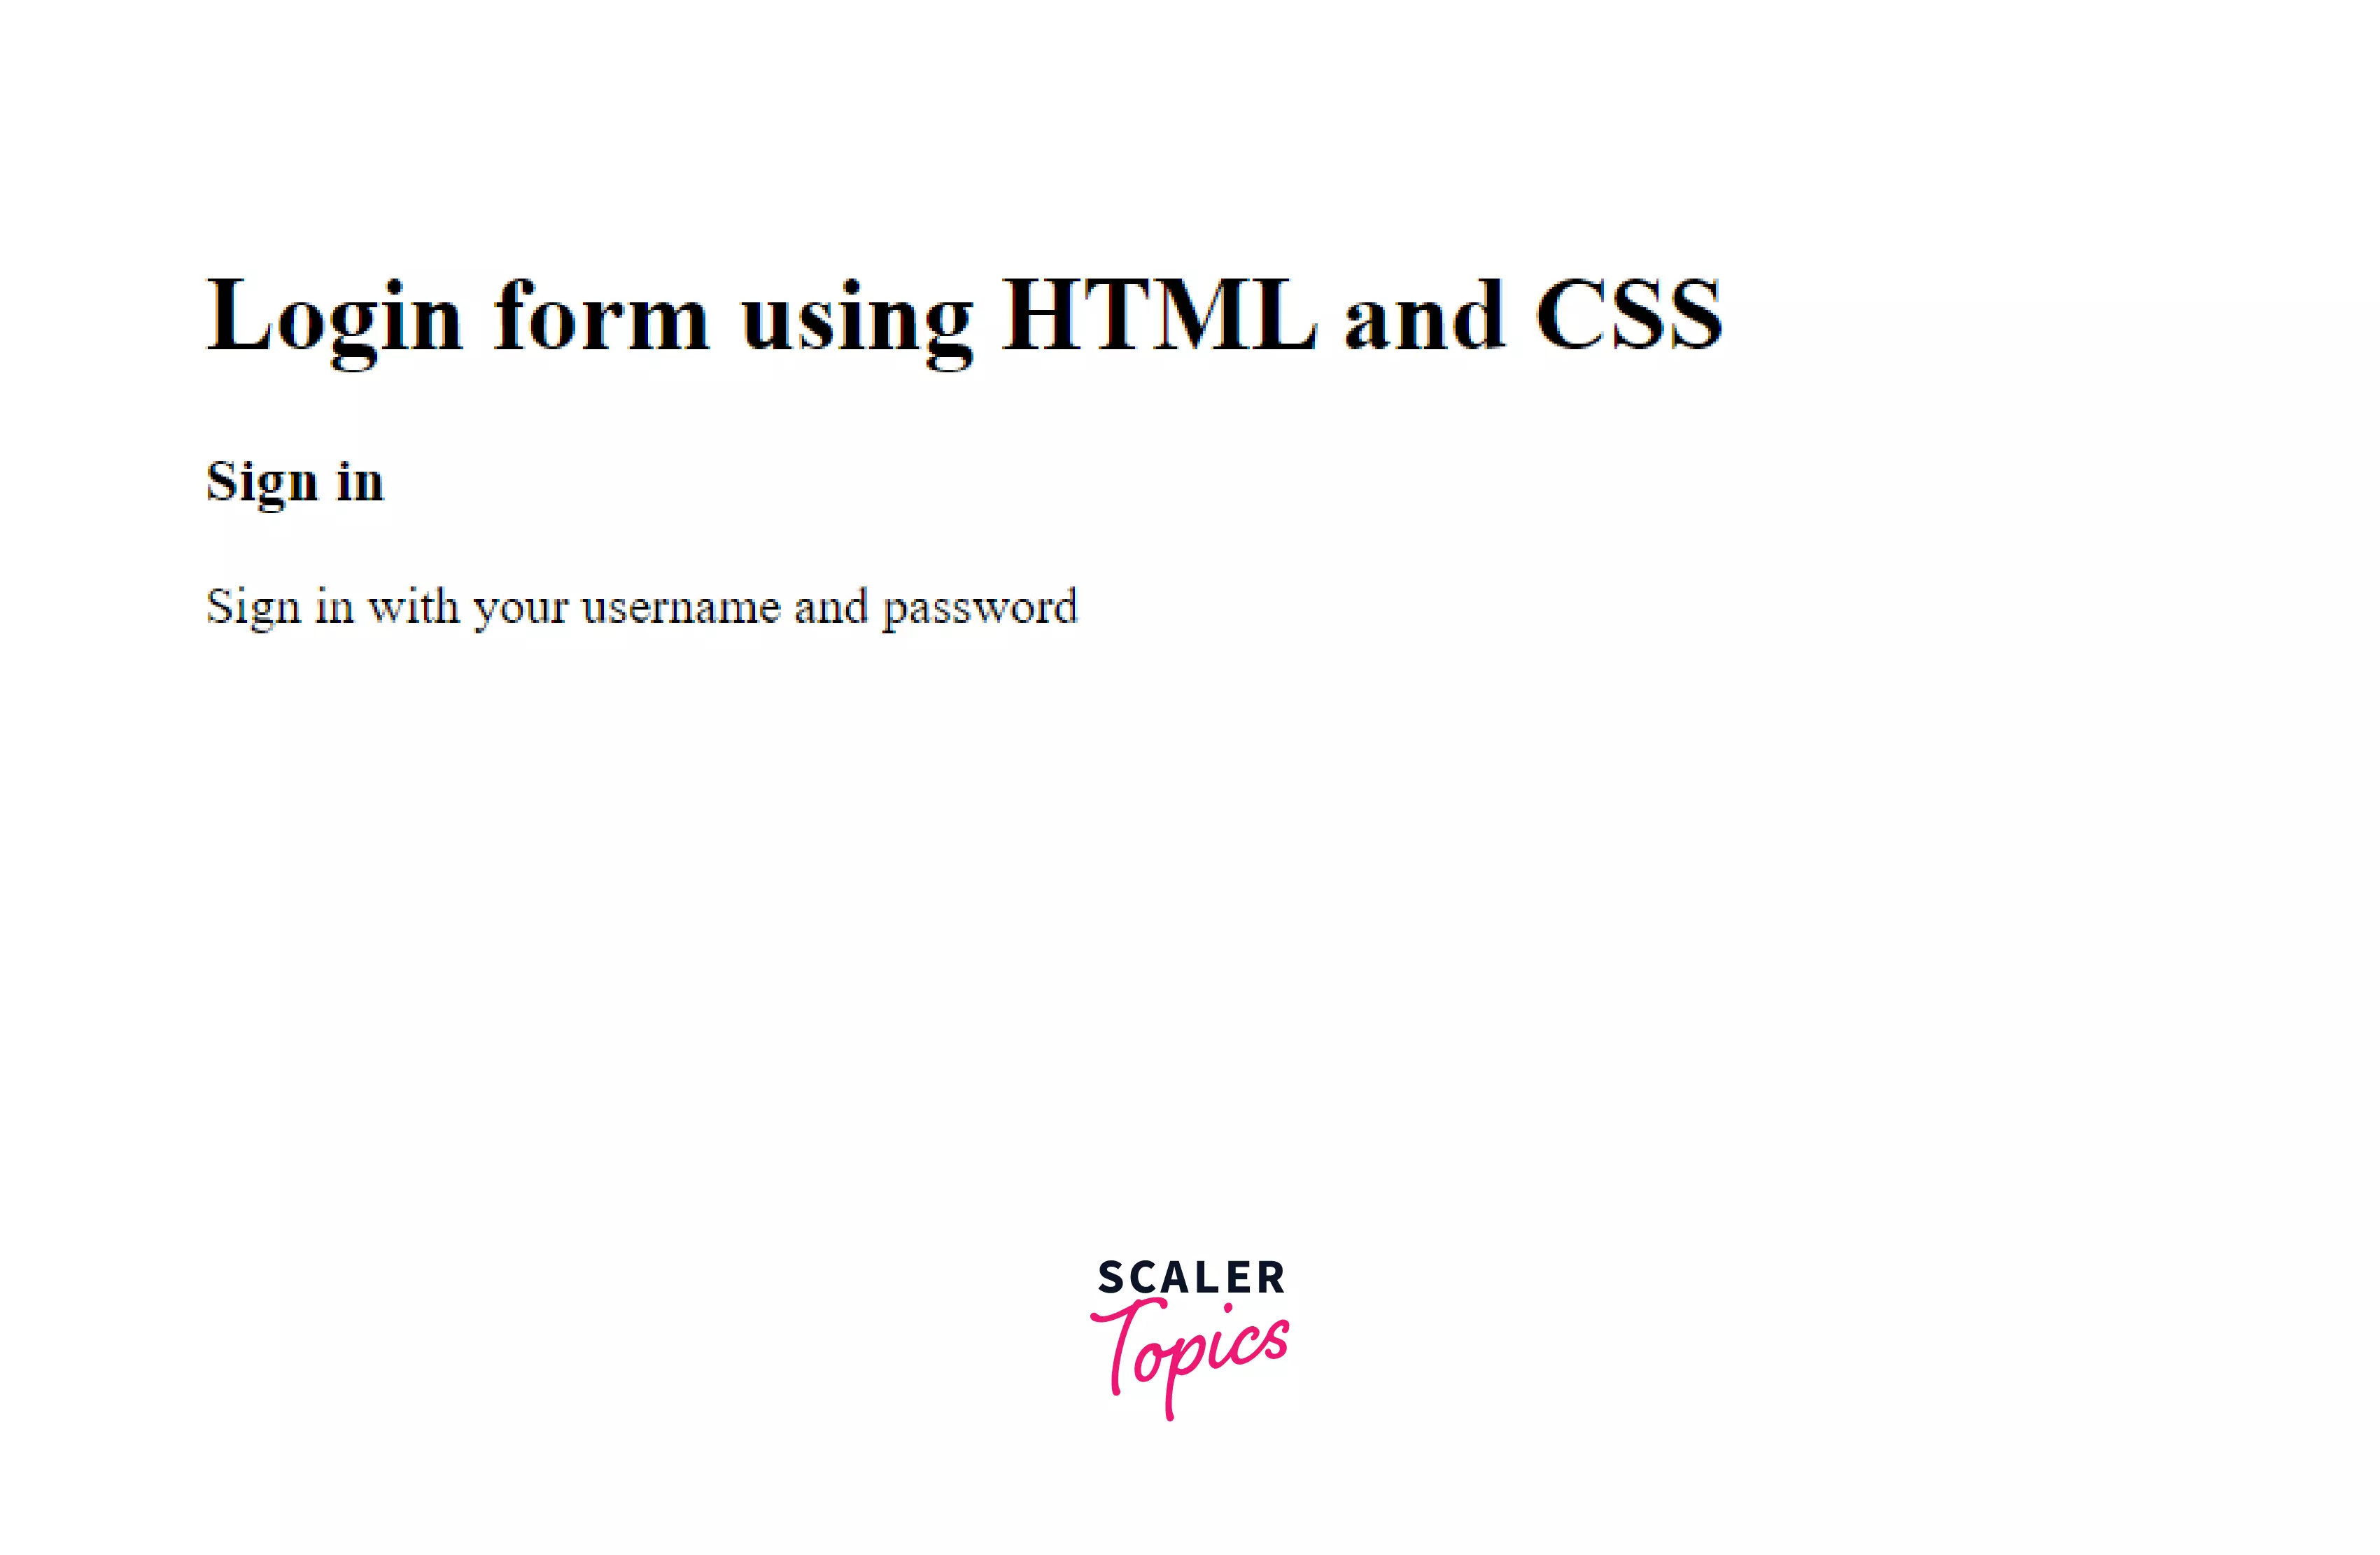 Creating the signin page structure with HTML